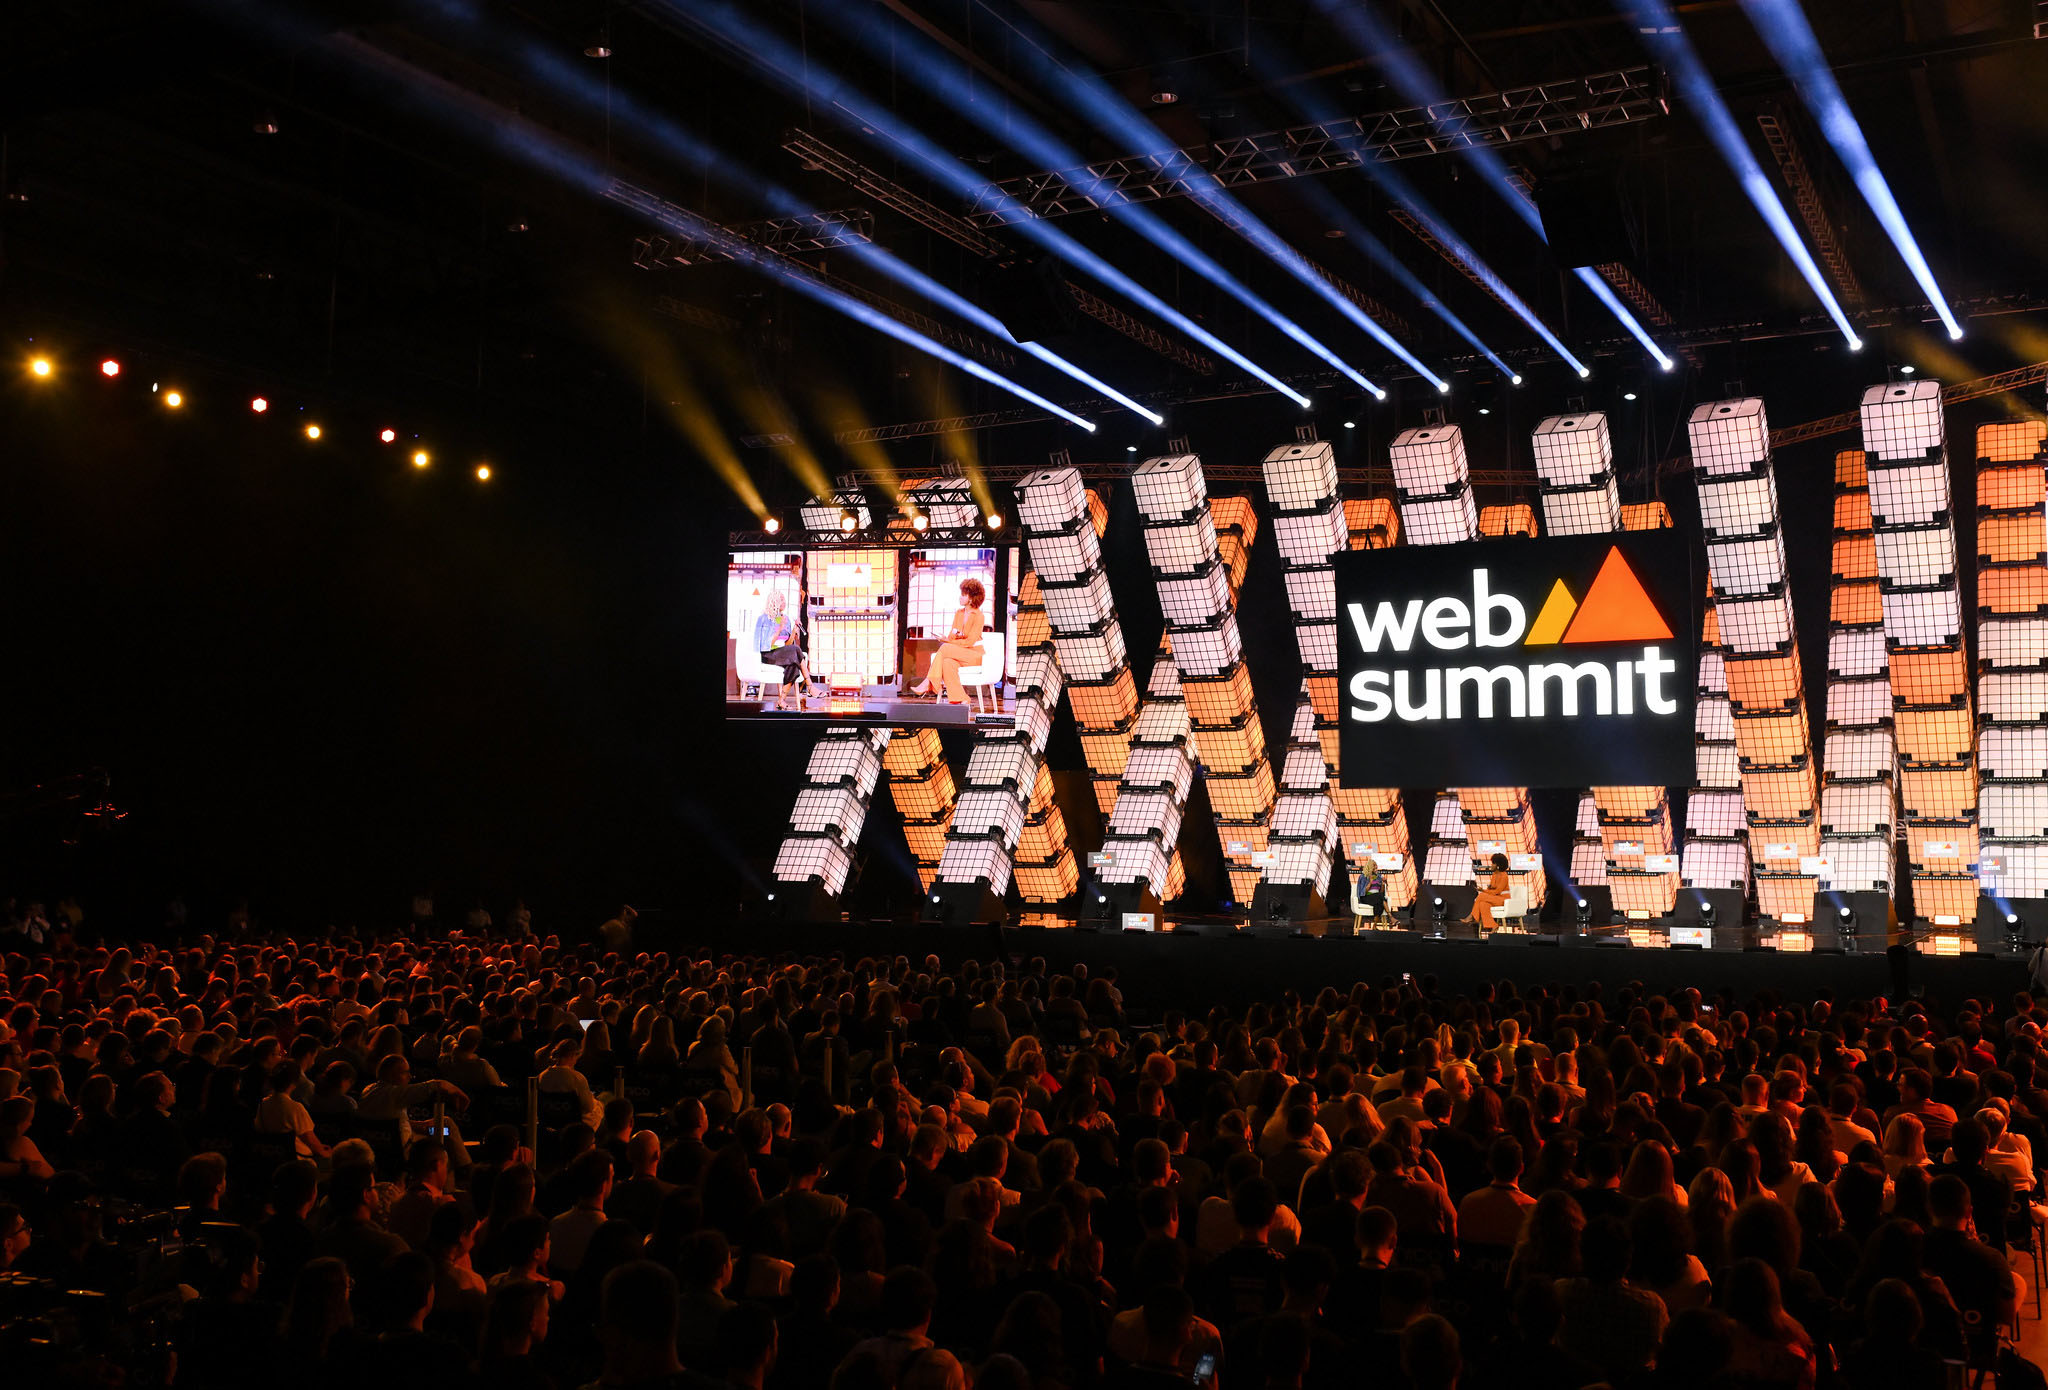 A zoomed-out photograph of Center Stage during the Opening Night at Web Summit Rio. There is a large audience of people sitting in front of a lit-up stage, with the Web Summit logo front and centre.